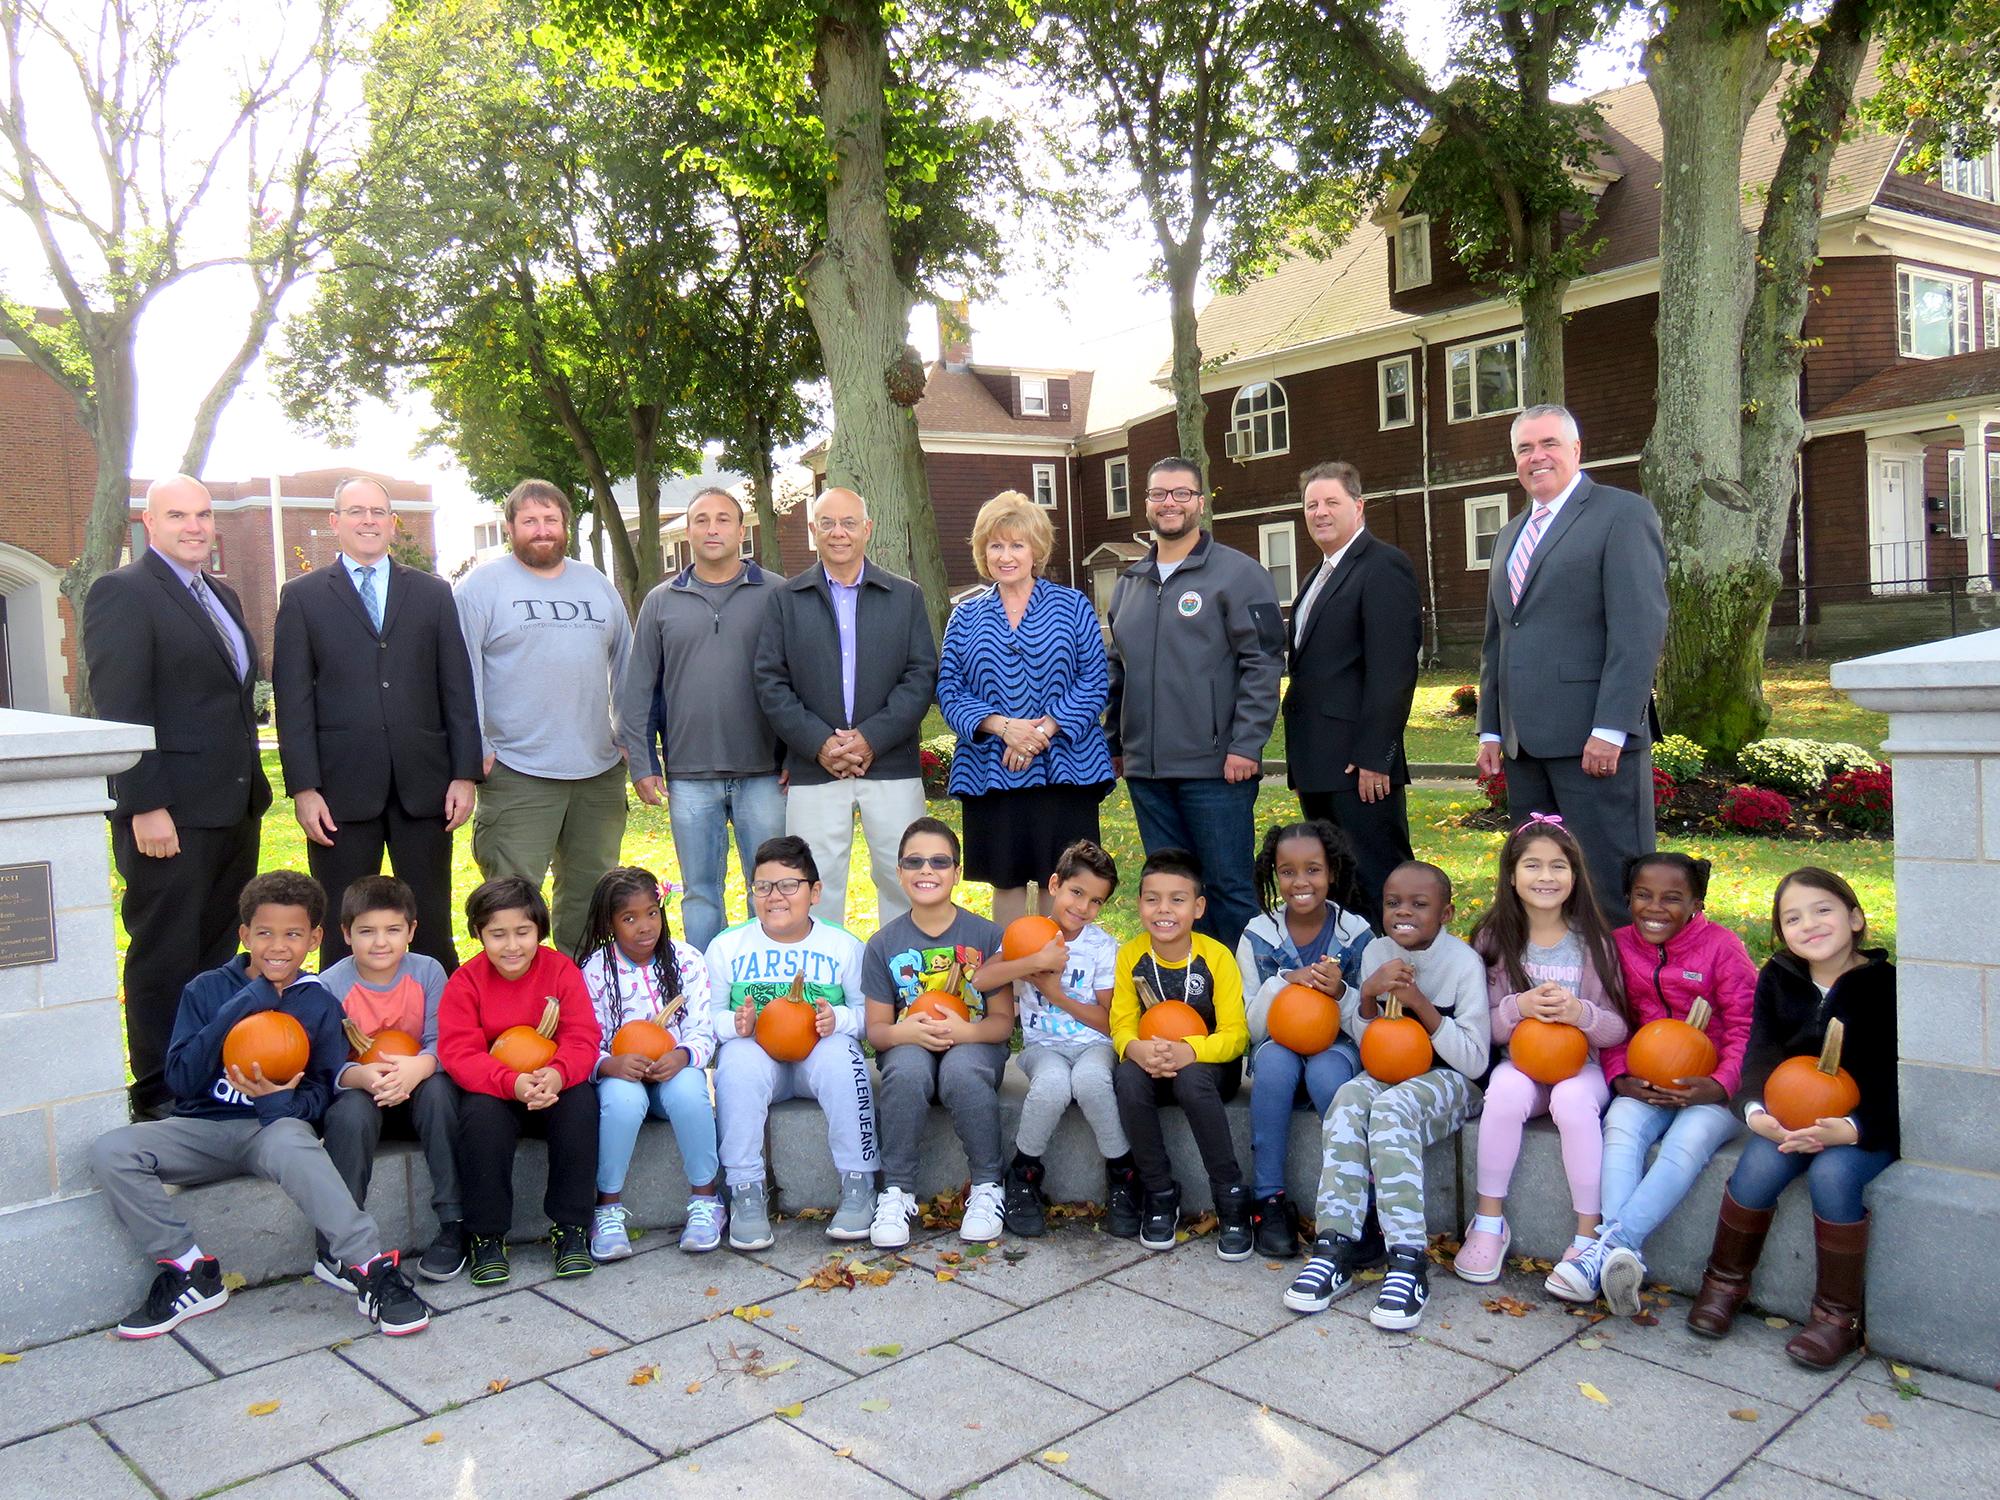 Parlin School students are pictured with Assistant Principal Dennis Lynch, Principal John Obremski, Trevor LaLiberte, Charlie Zammuto, Al Lattanzi, Superintendent Janice Gauthier, City Councilor Anthony DiPierro, and Assistant Superintendents Charles Obremski and Kevin Shaw.